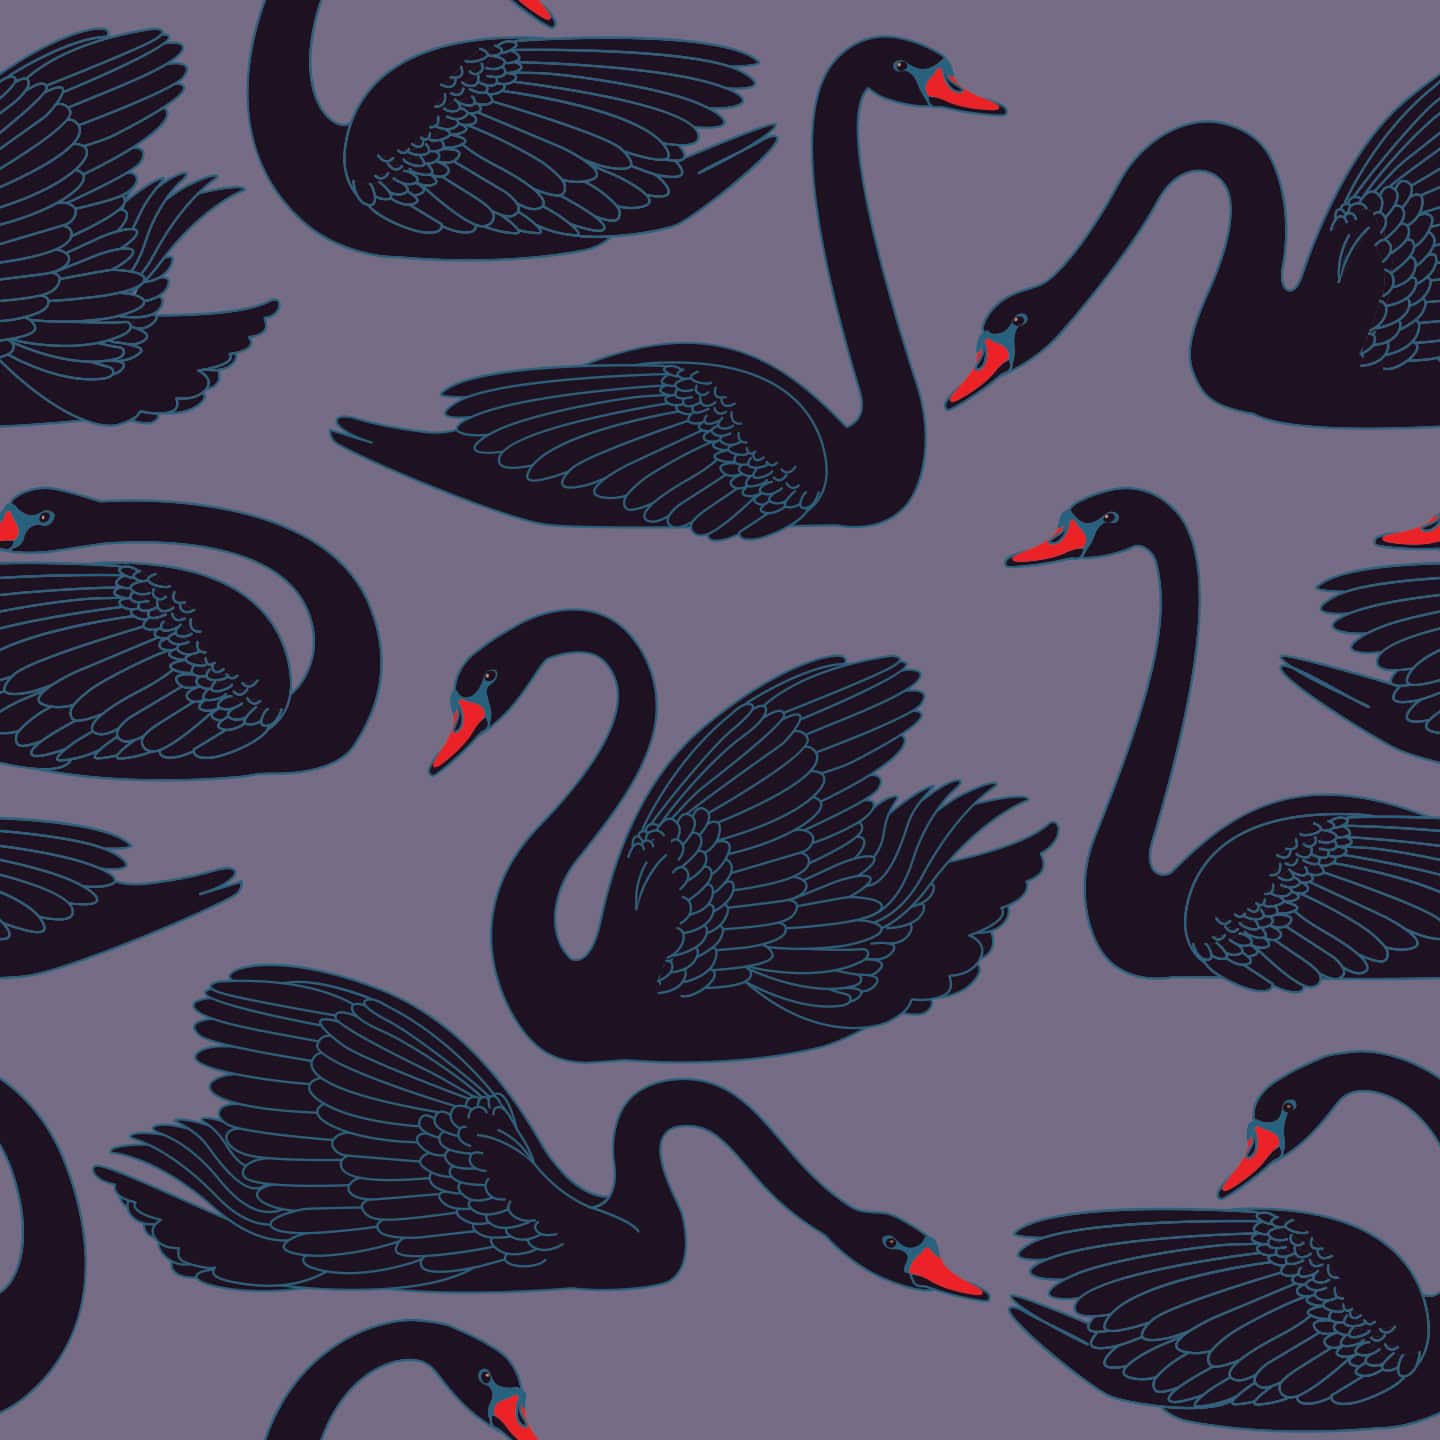 Black swan wallpaper - Peel and Stick or Traditional